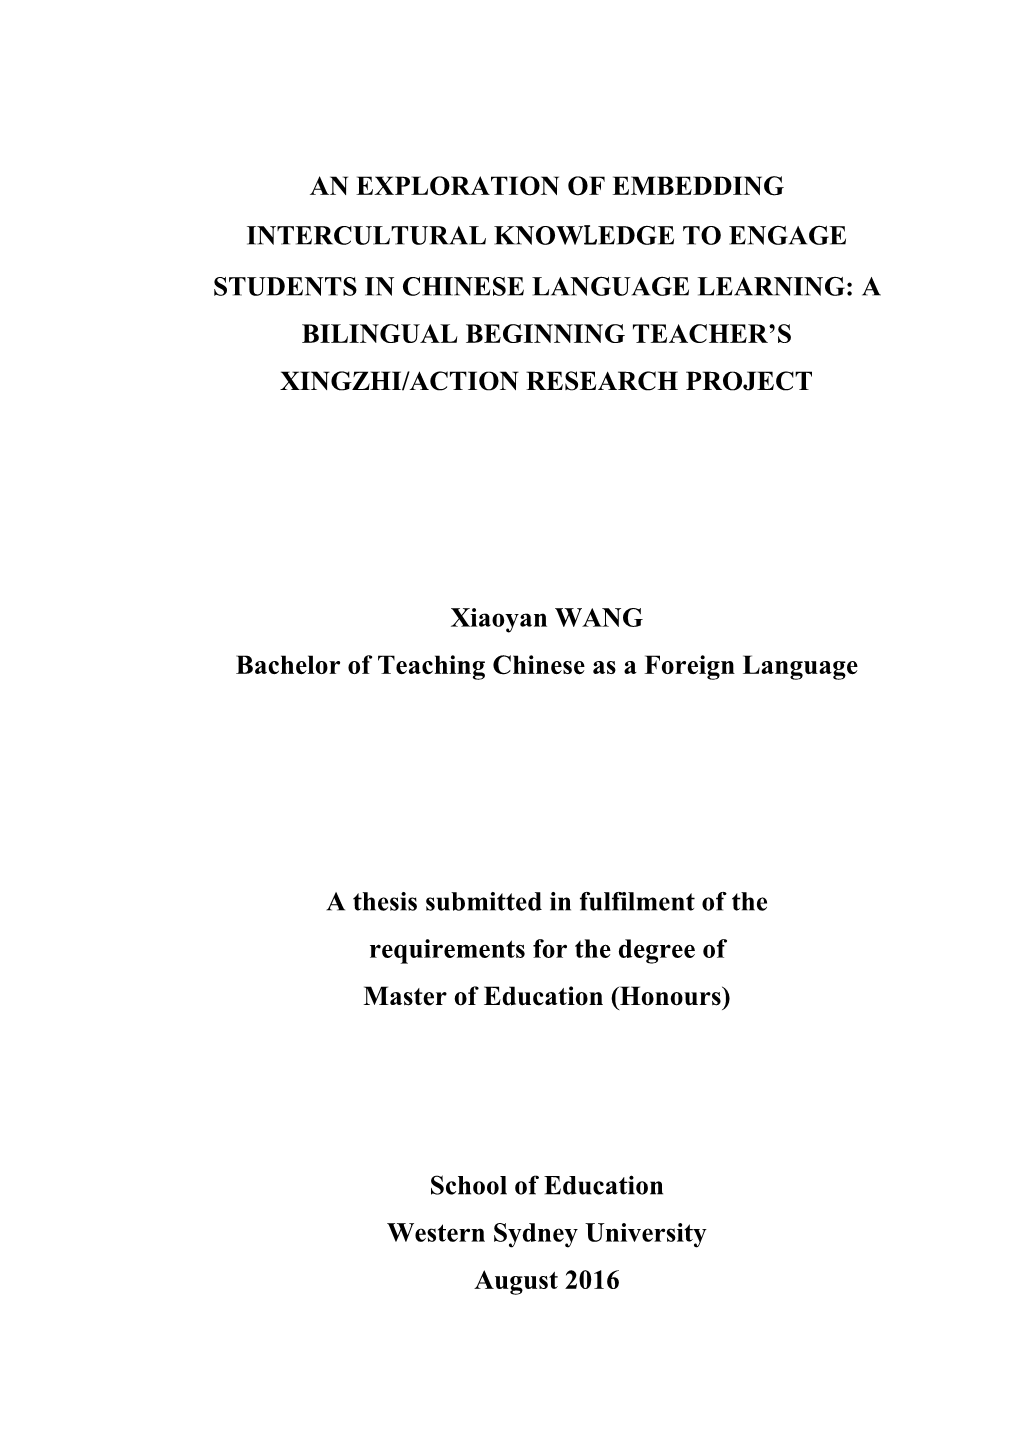 An Exploration of Embedding Intercultural Knowledge to Engage Students in Chinese Language Learning: a Bilingual Beginning Teacher’S Xingzhi/Action Research Project